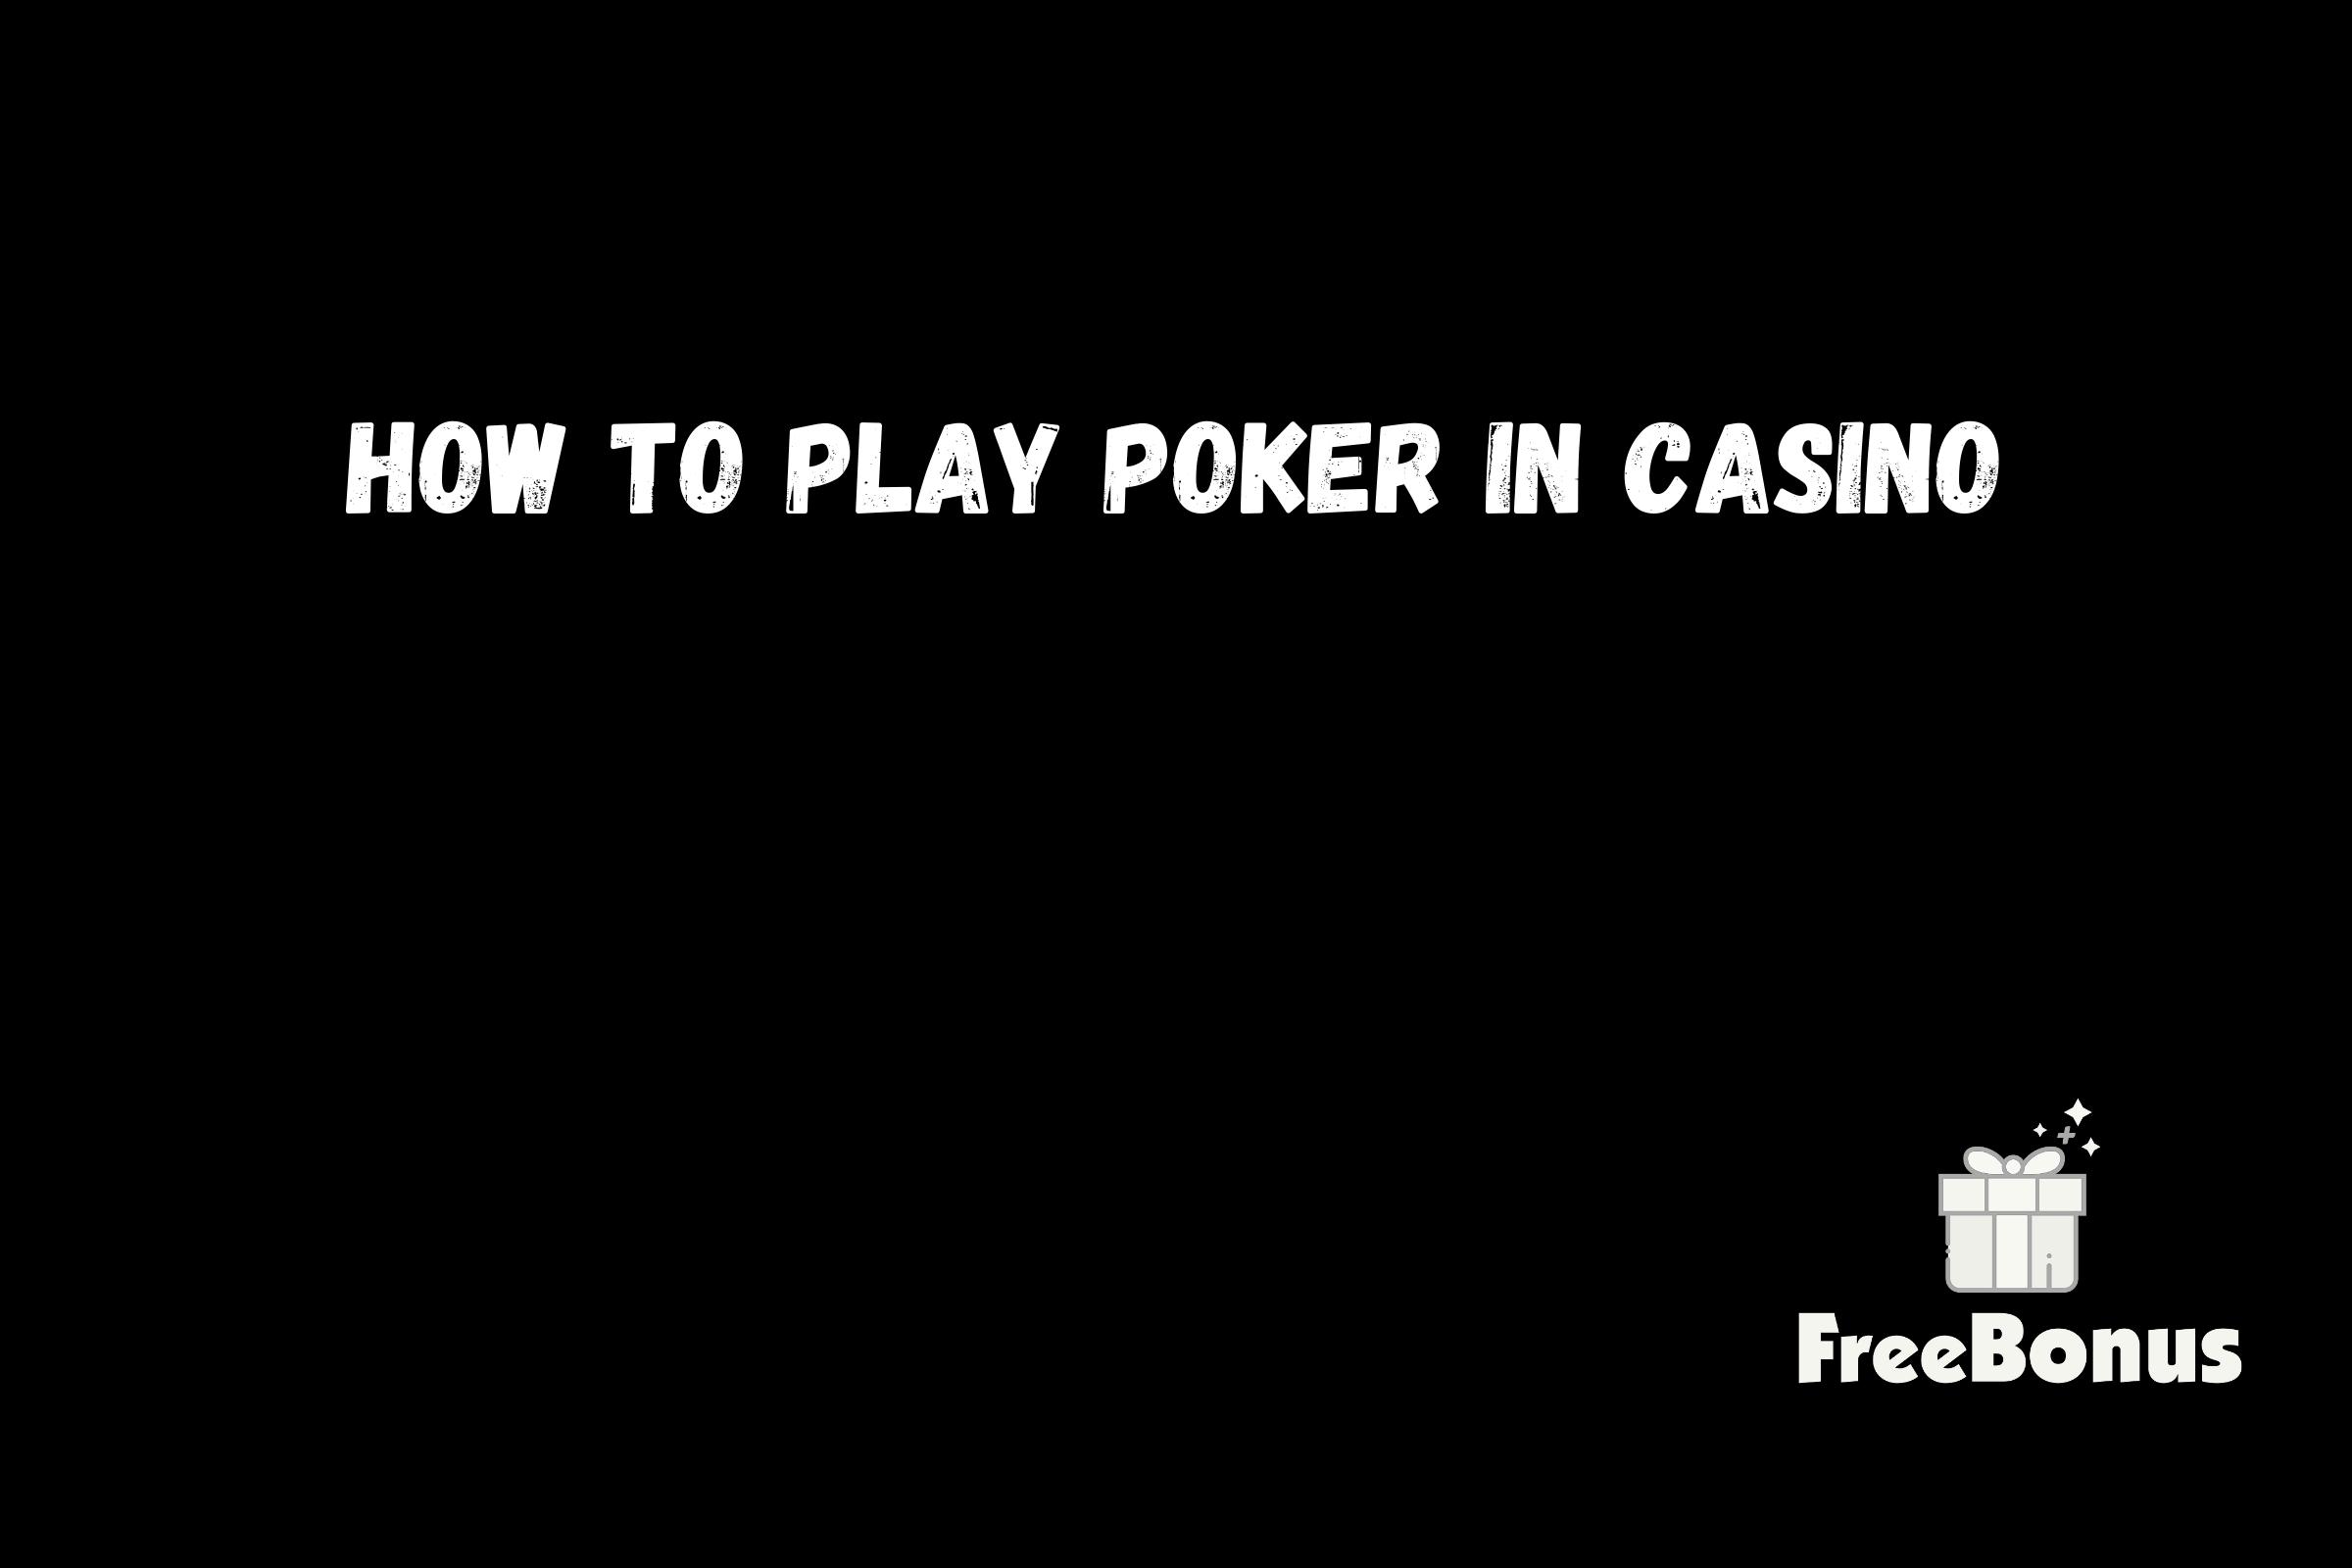 How To Play Poker In Casino